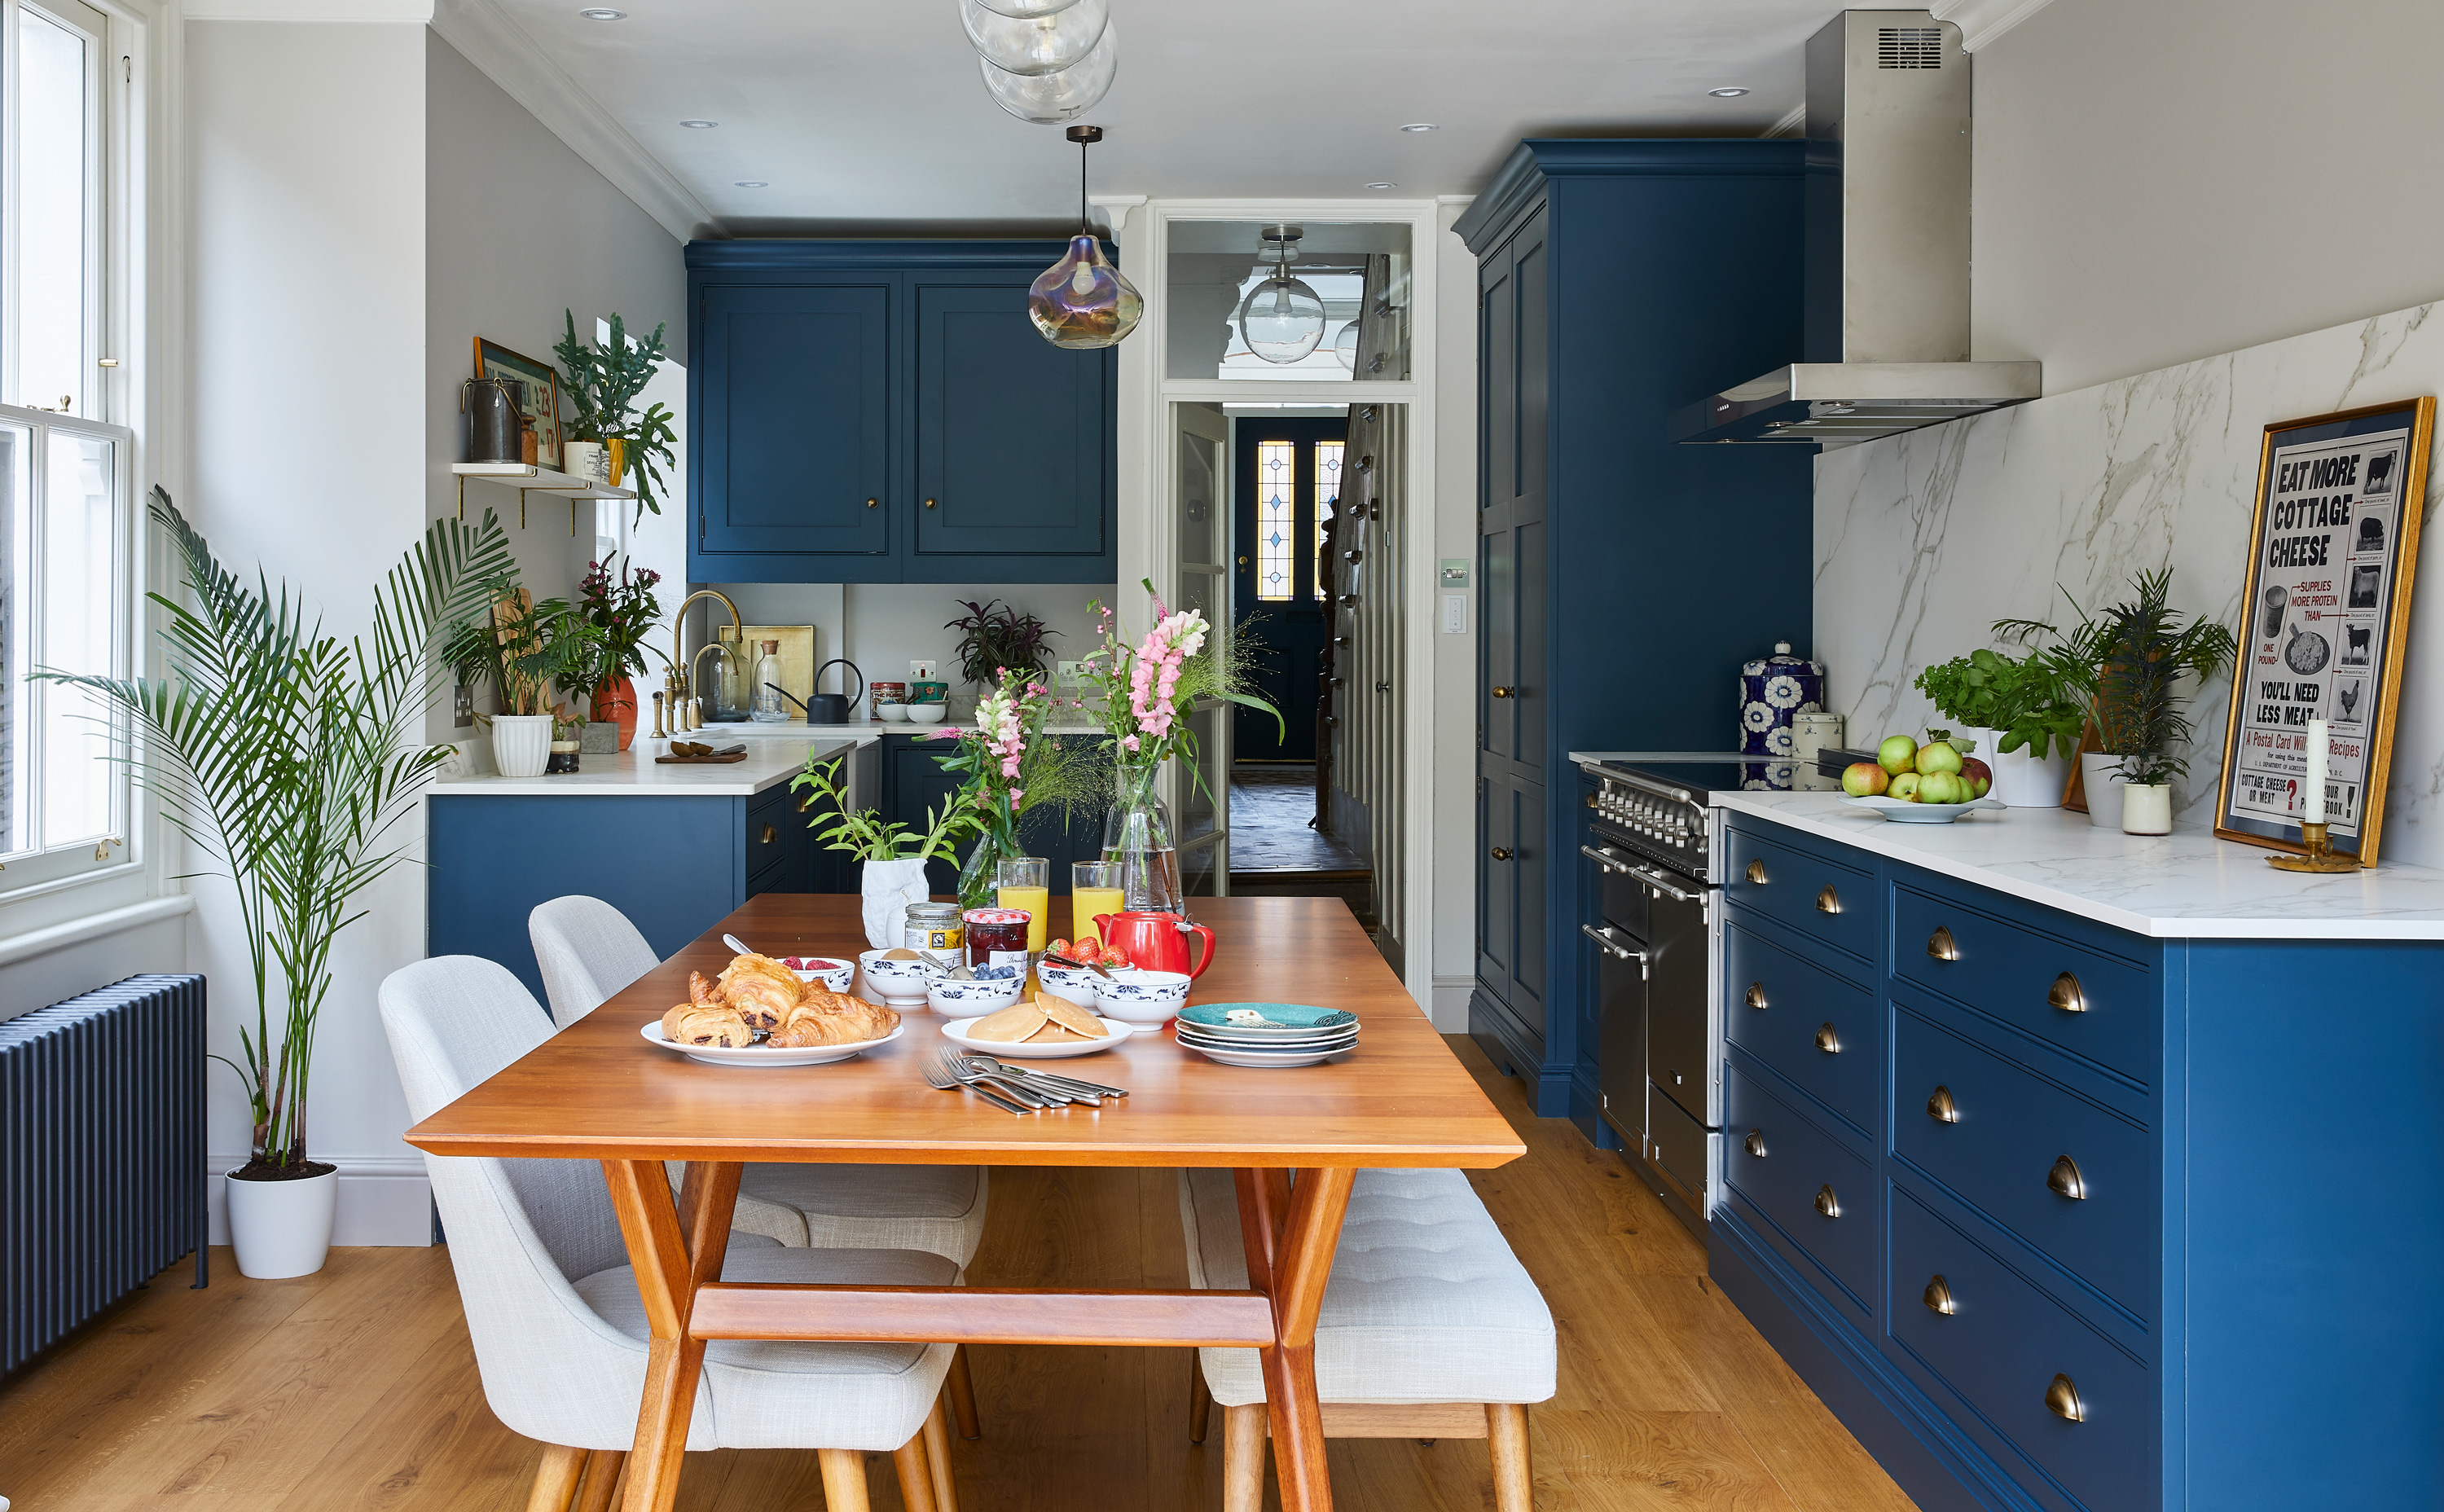 15 blue kitchen ideas to make you want to try this on trend look | Real  Homes